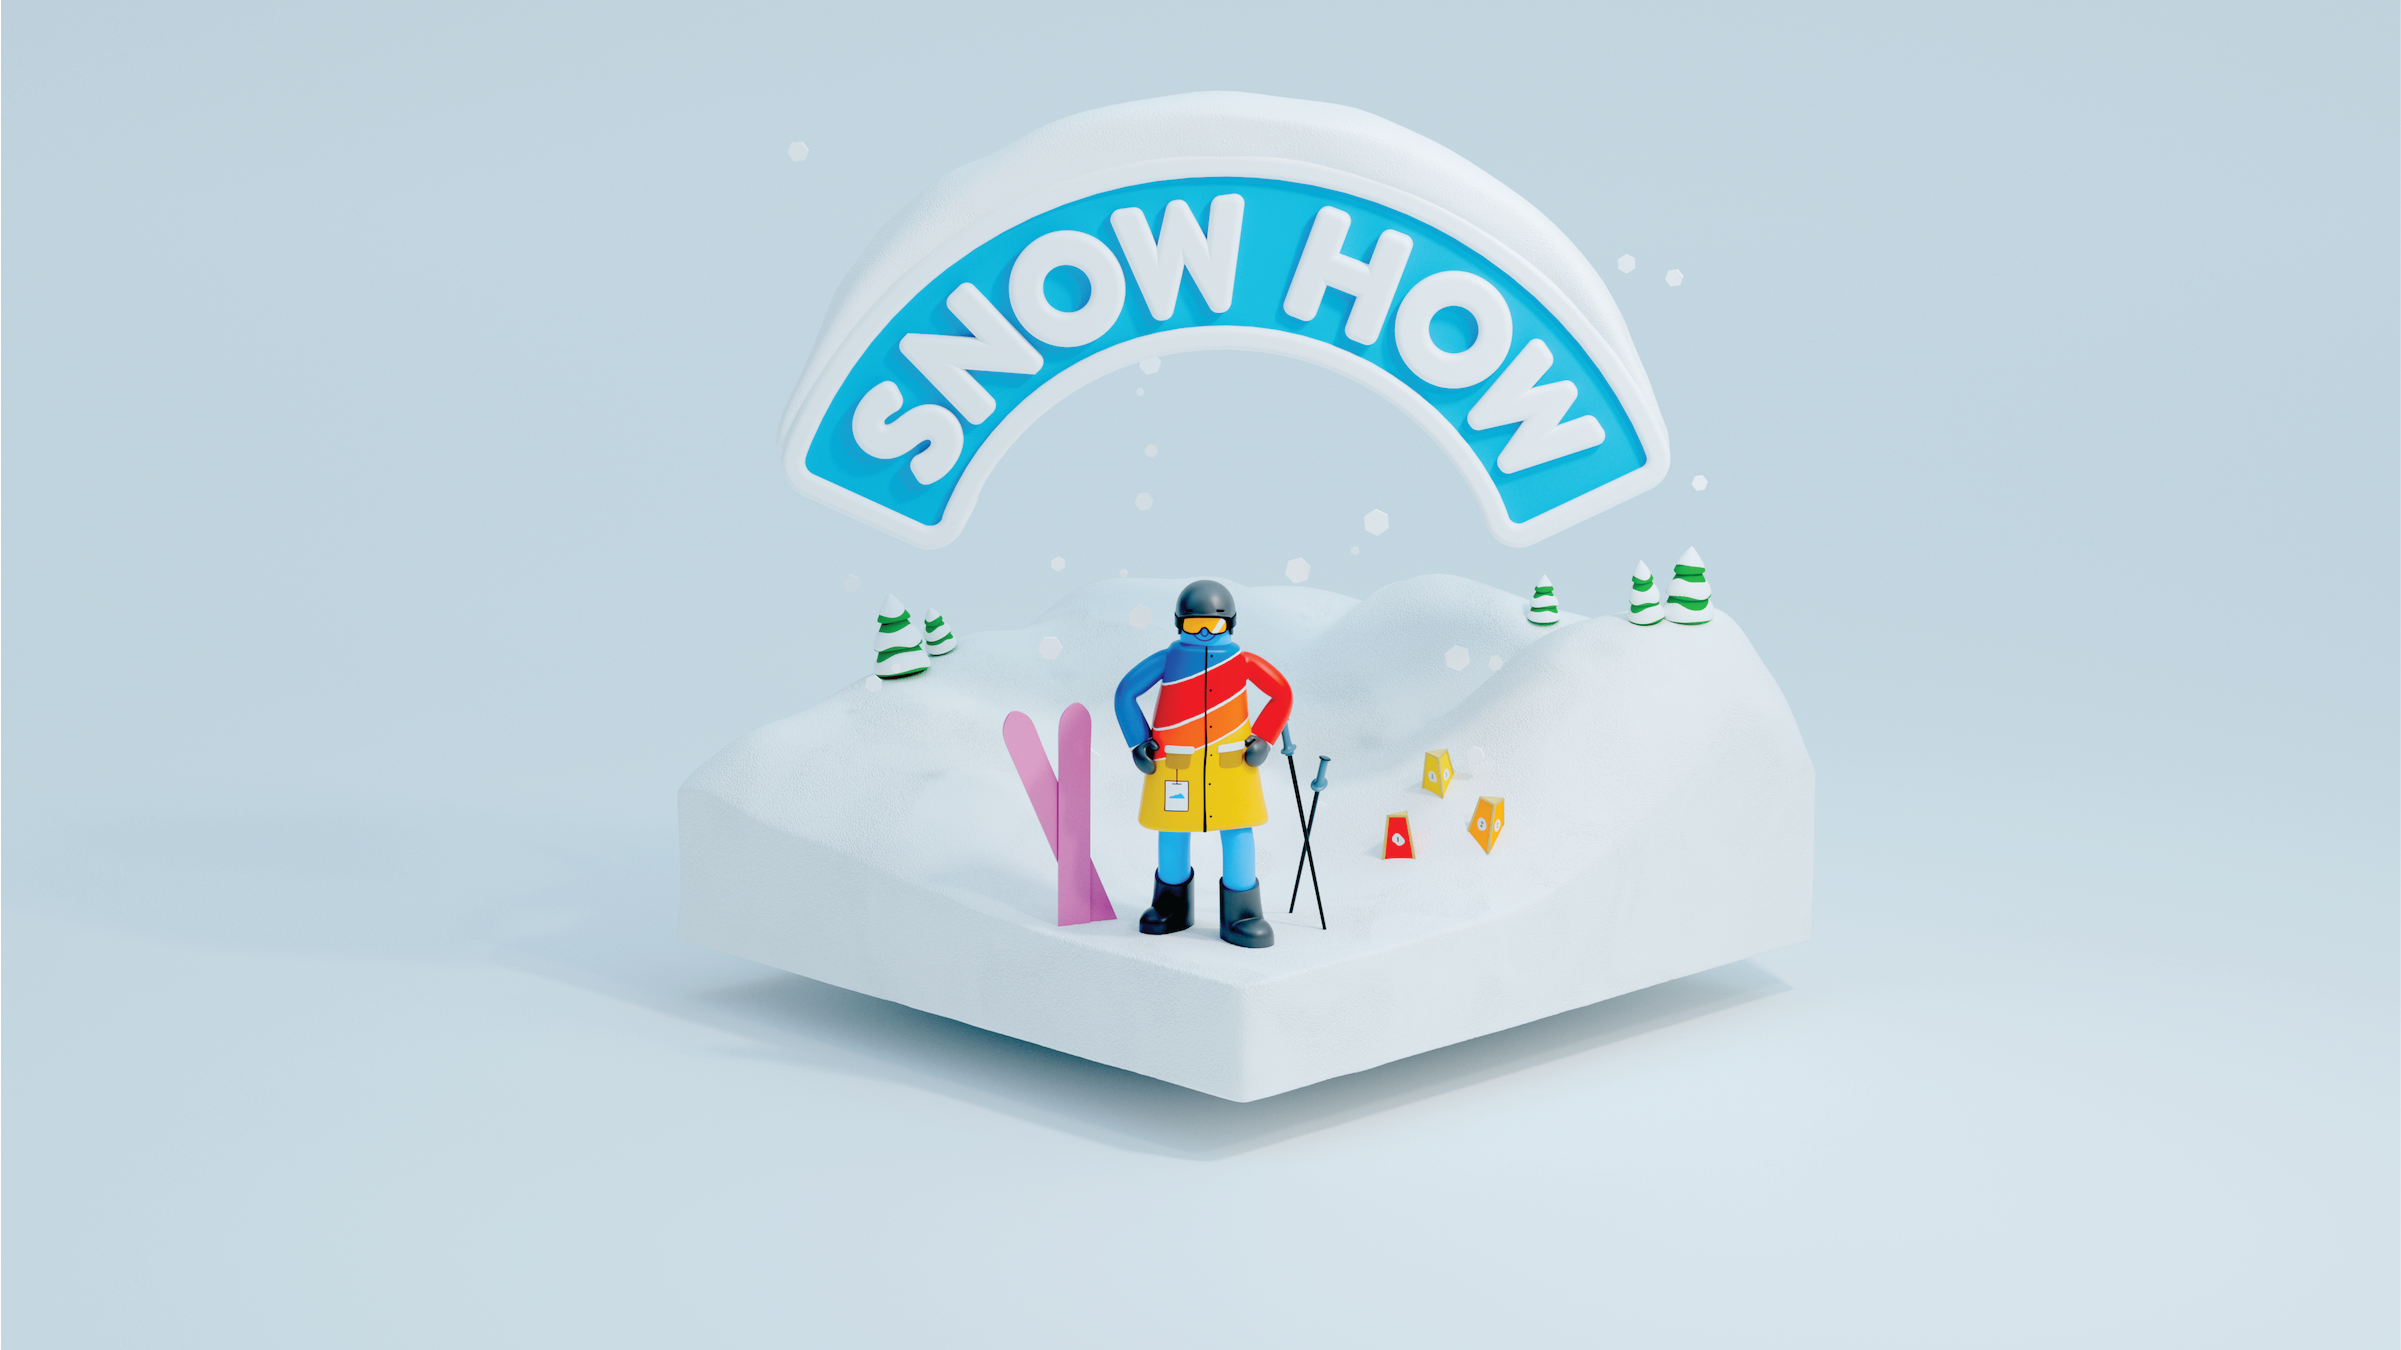 Snow How icon for Snow How Self Learn System to learn how to ski or snowboard at Blue Mountain